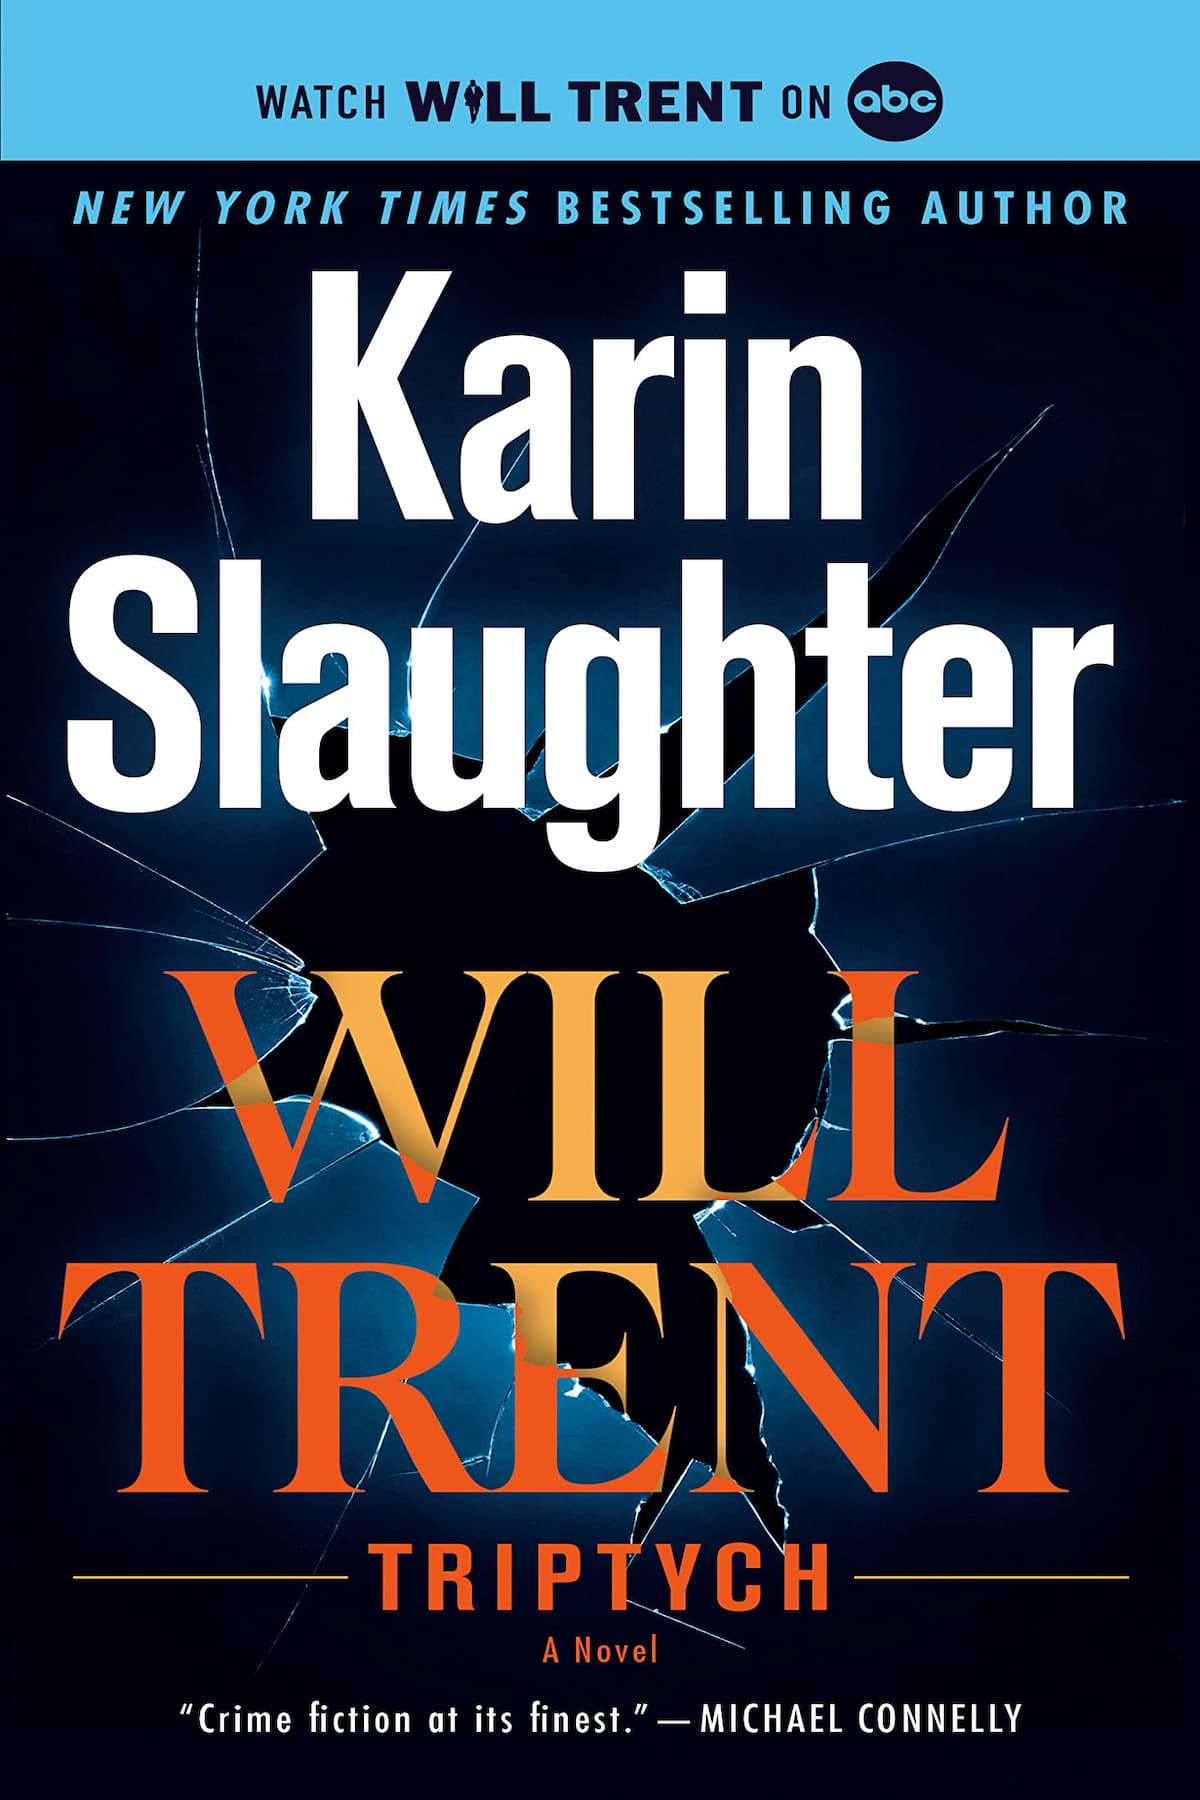 Triptych – Karin Slaughter